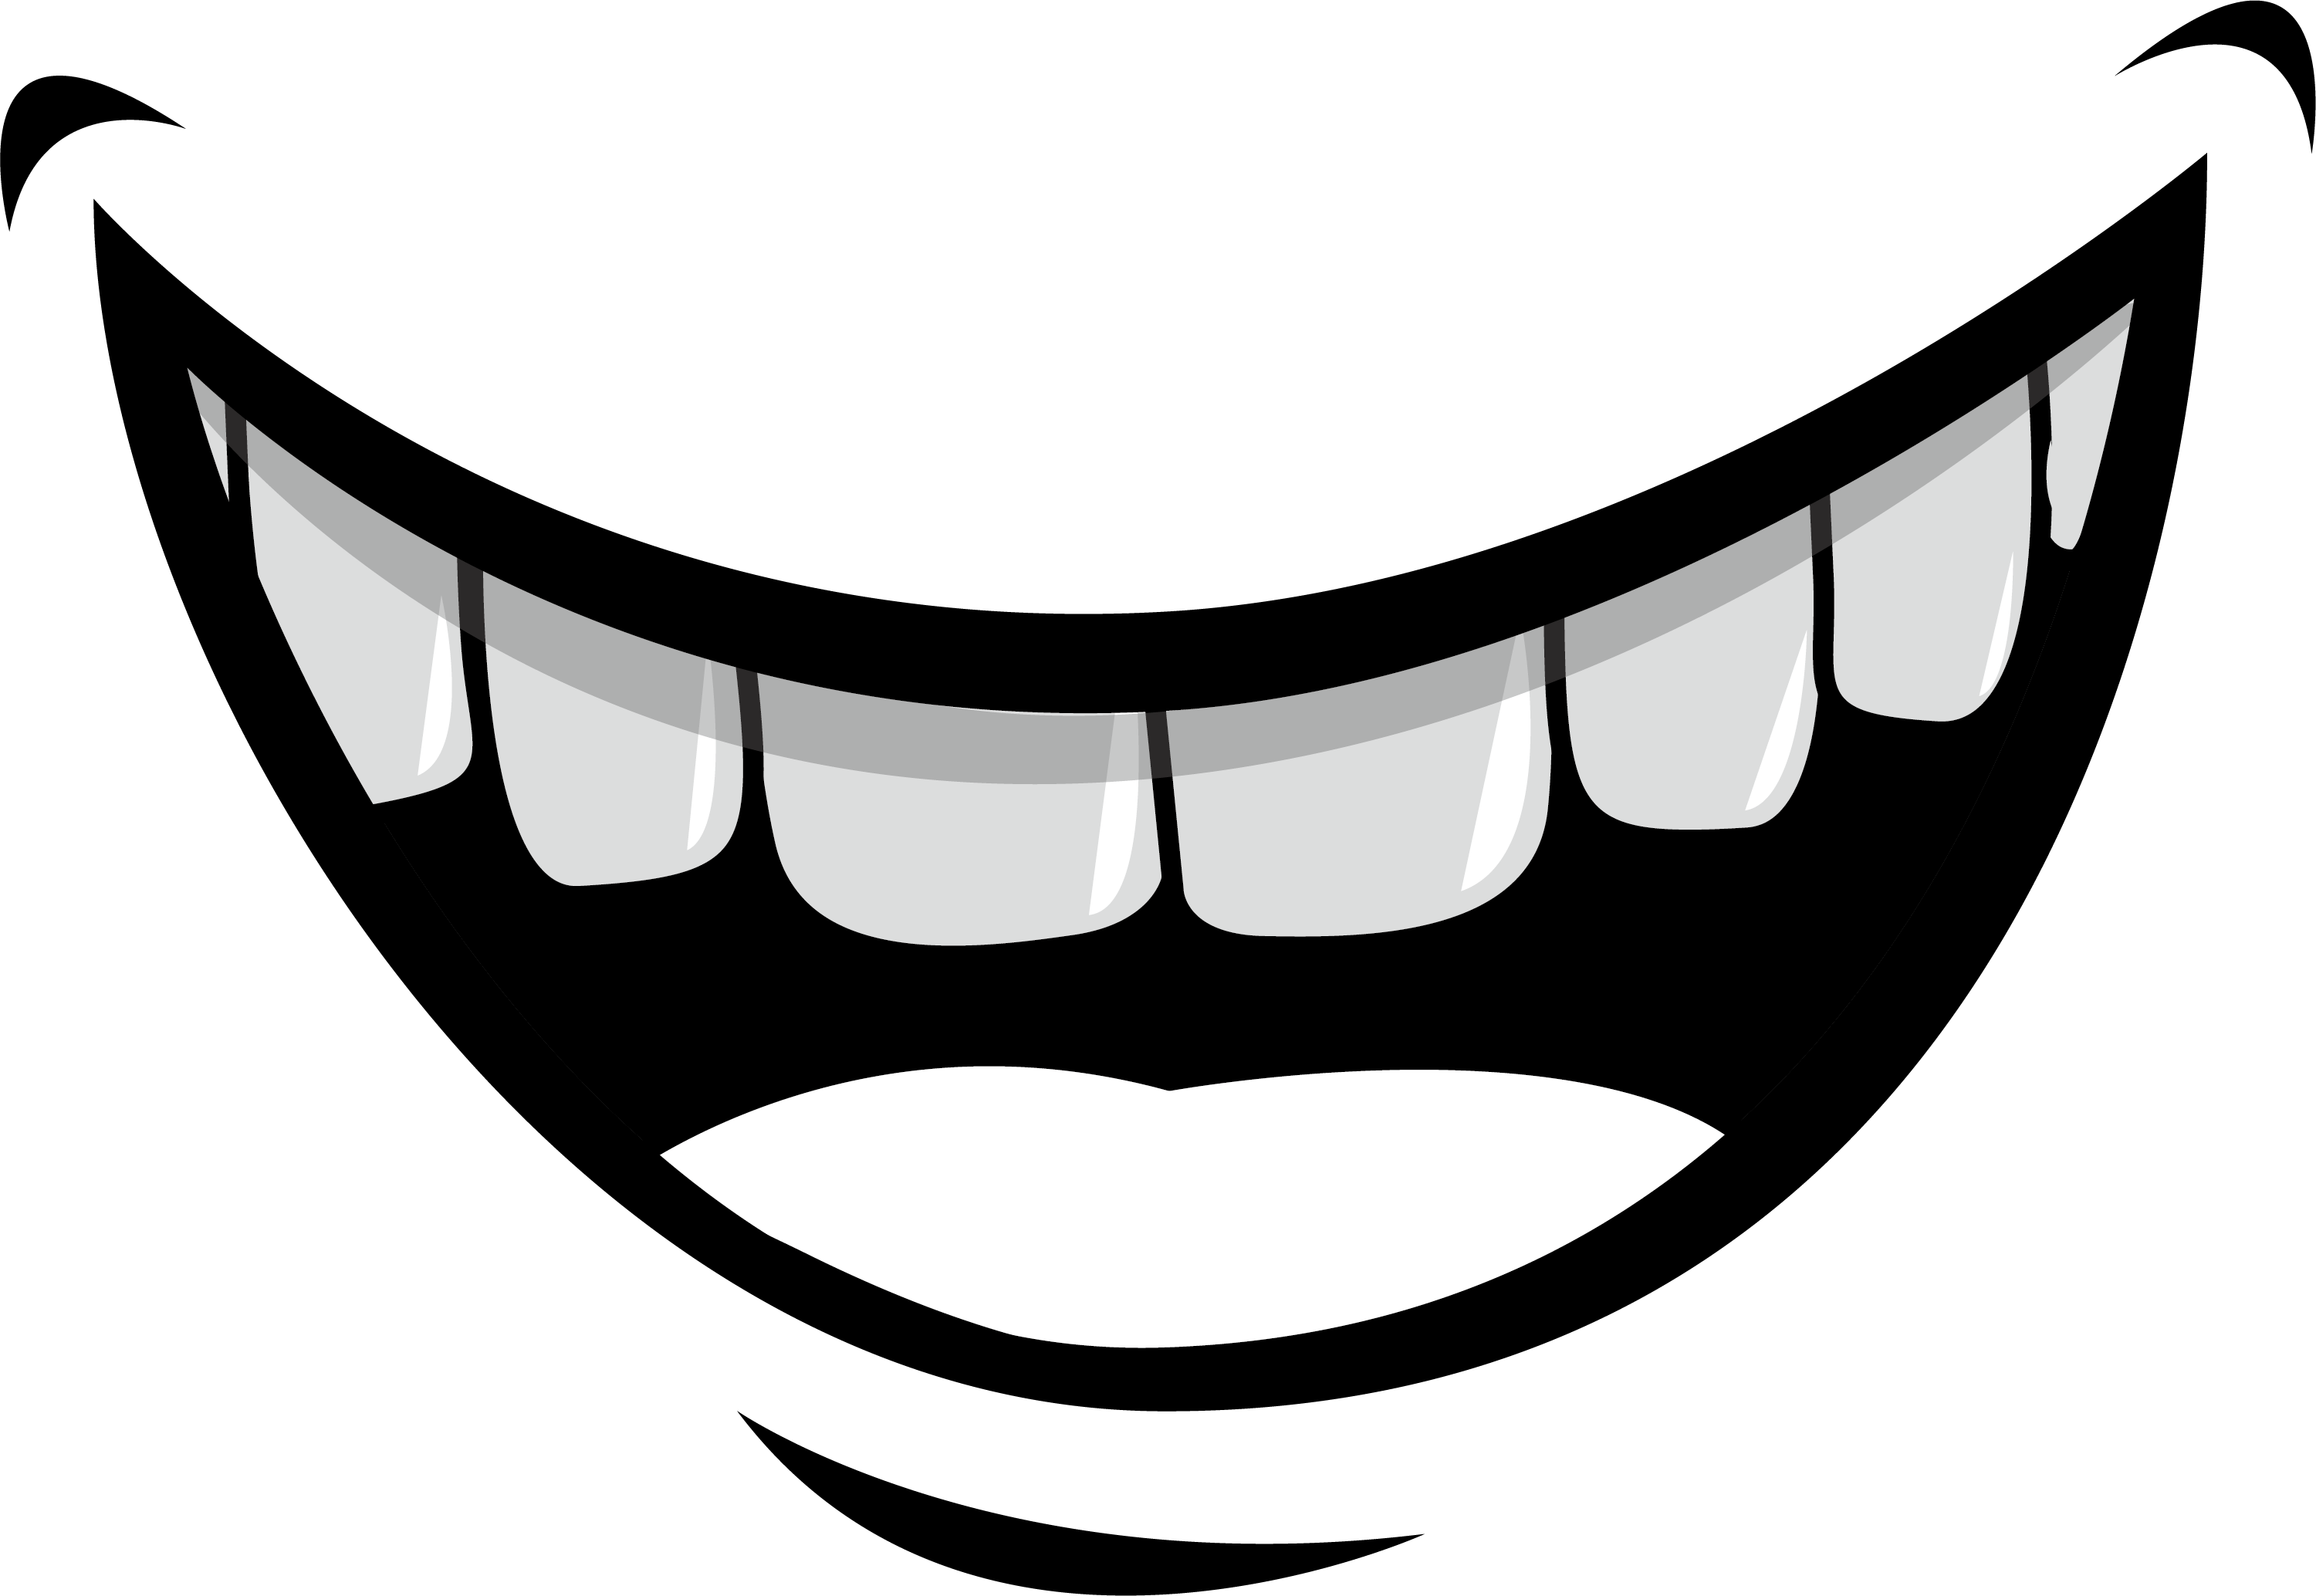 Mouth Lip Tooth Illustration - Creative smile expression png download